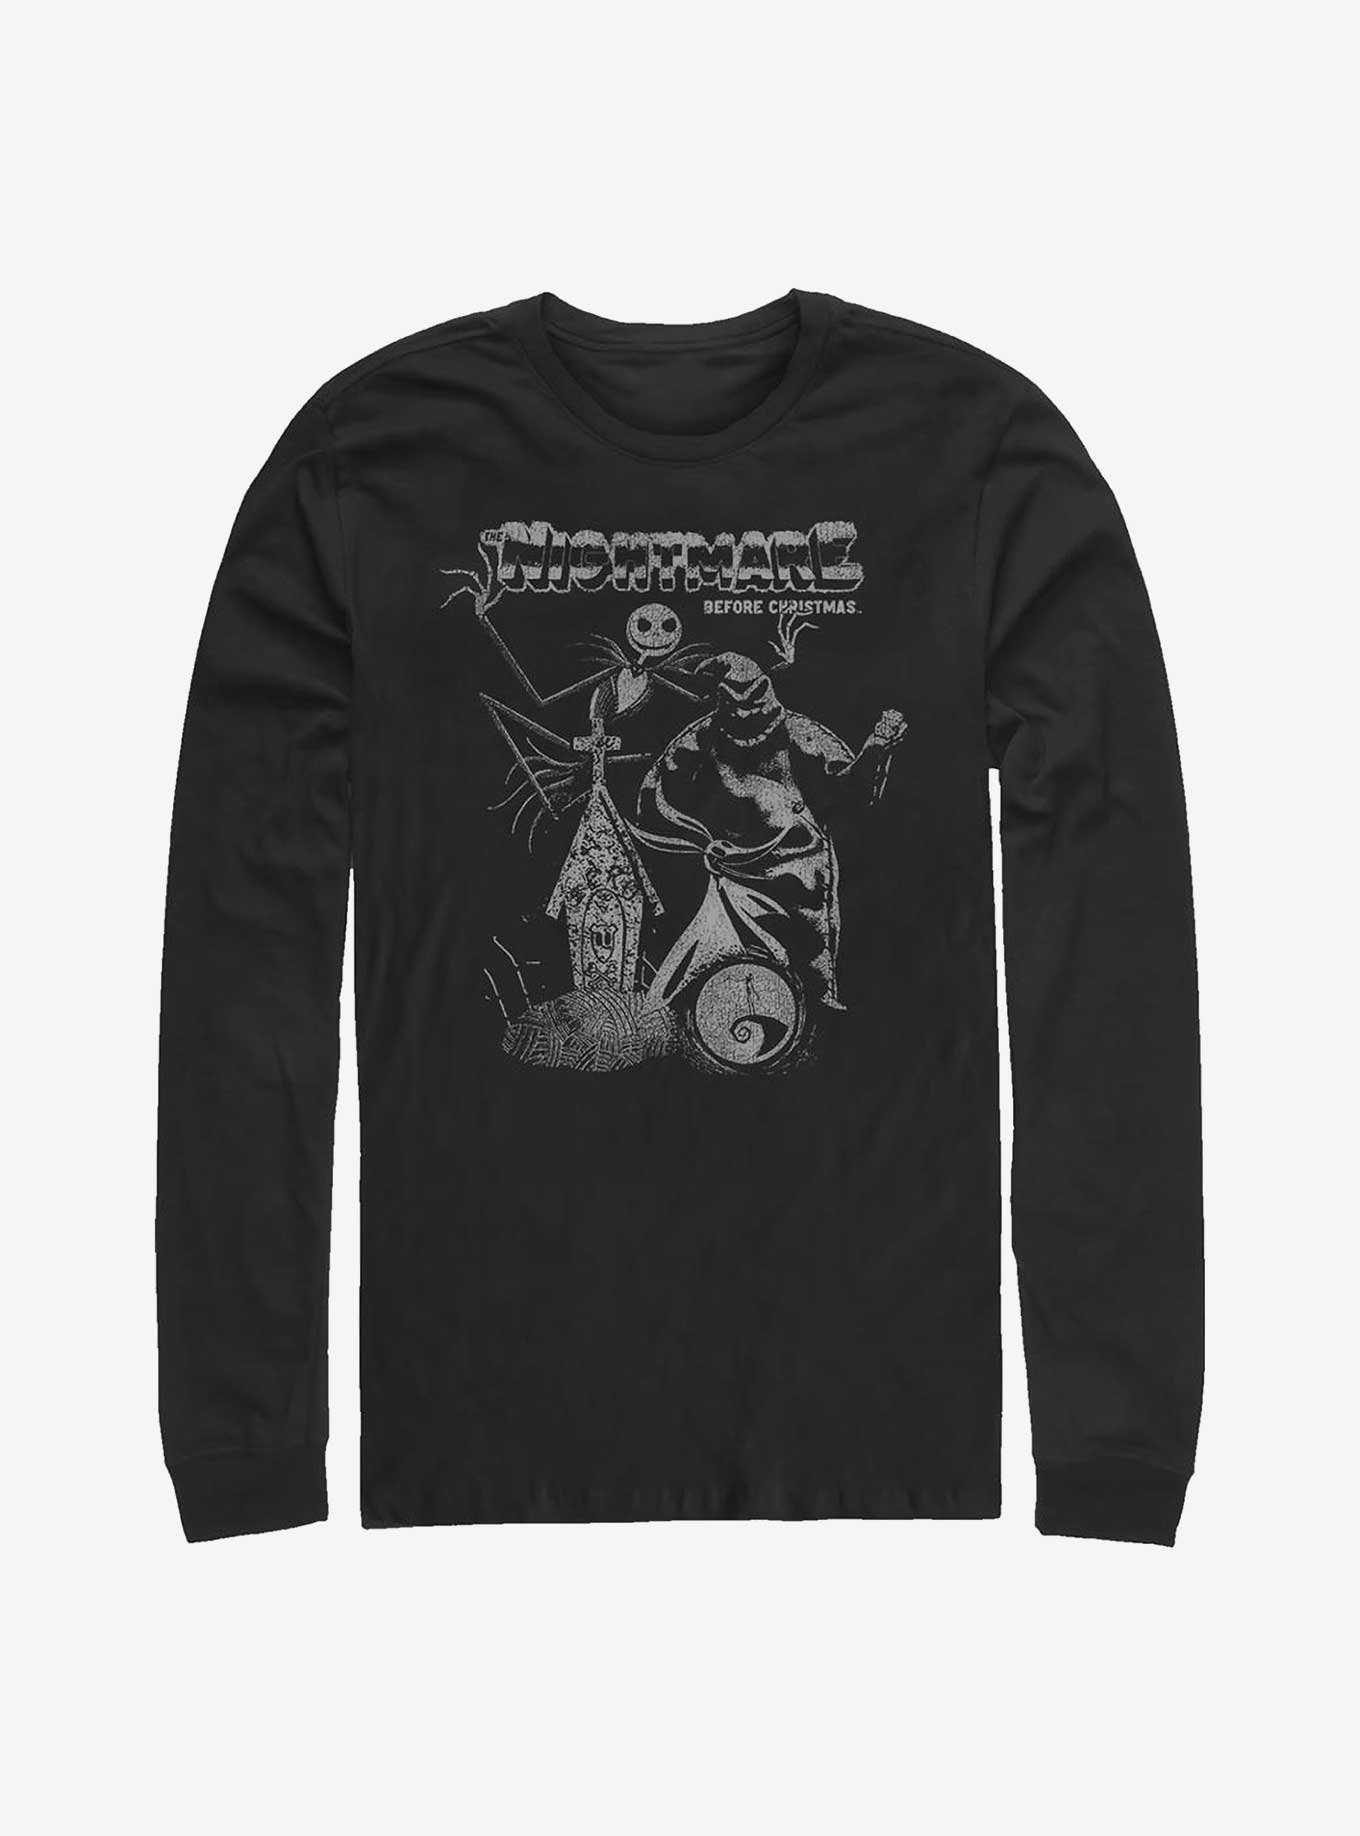 Disney The Nightmare Before Christmas Vintage Poster Long-Sleeve T-Shirt, , hi-res